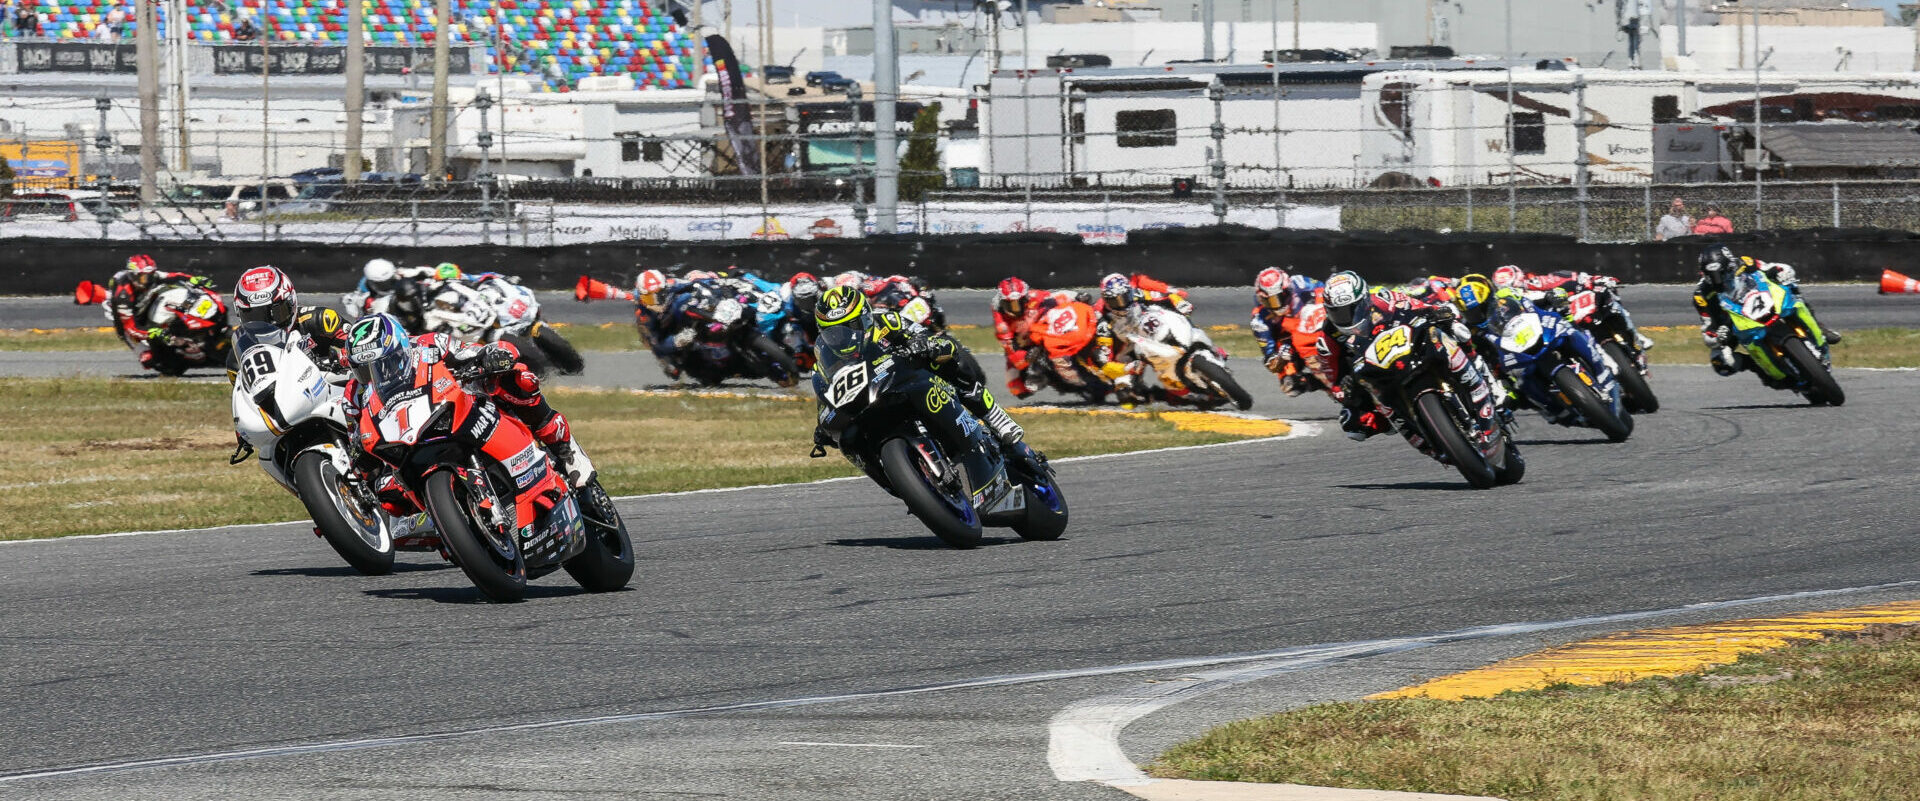 Josh Herrin (1), Danny Eslick (69), PJ Jacobsen (66), Richie Escalante (54), Cameron Petersen (45), Josh Hayes (4), and the rest of the field during the start of the 81st Daytona 200. Photo by Brian J. Nelson.